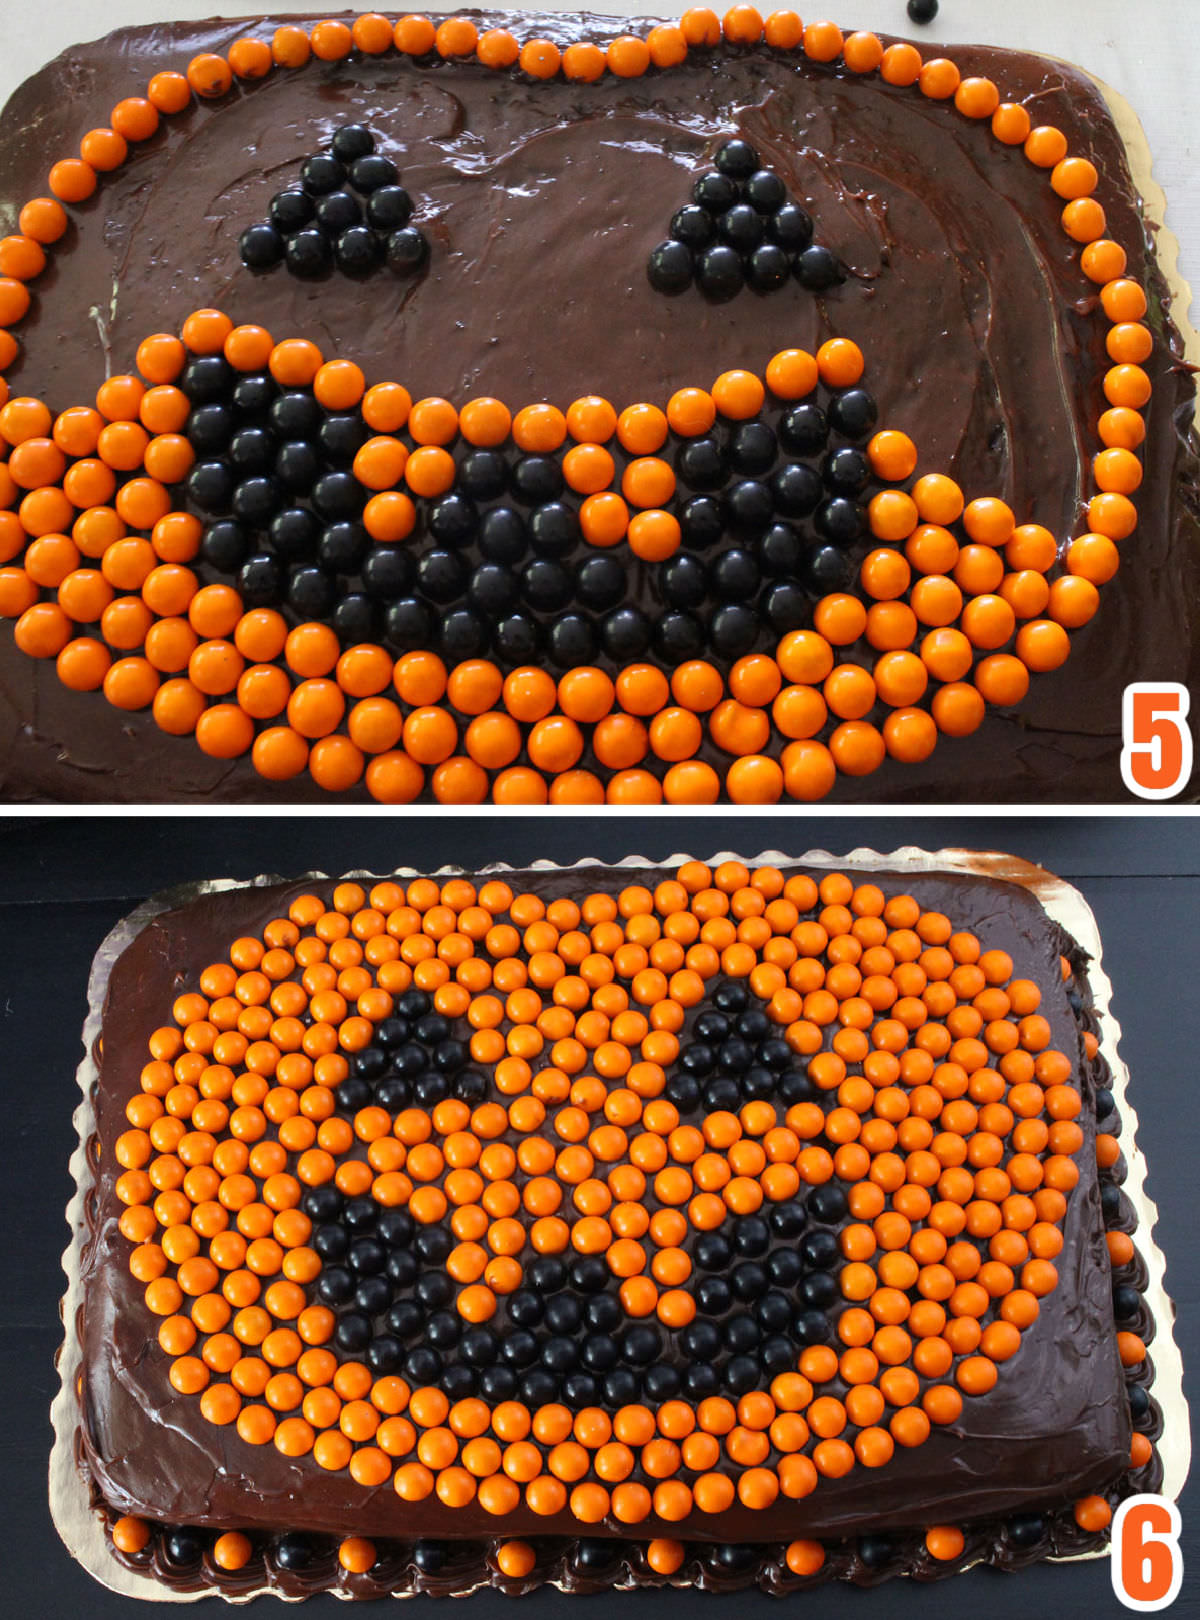 Collage image showing the steps for creating the Pumpkin Cake Decoration with Orange and Black sixlets.